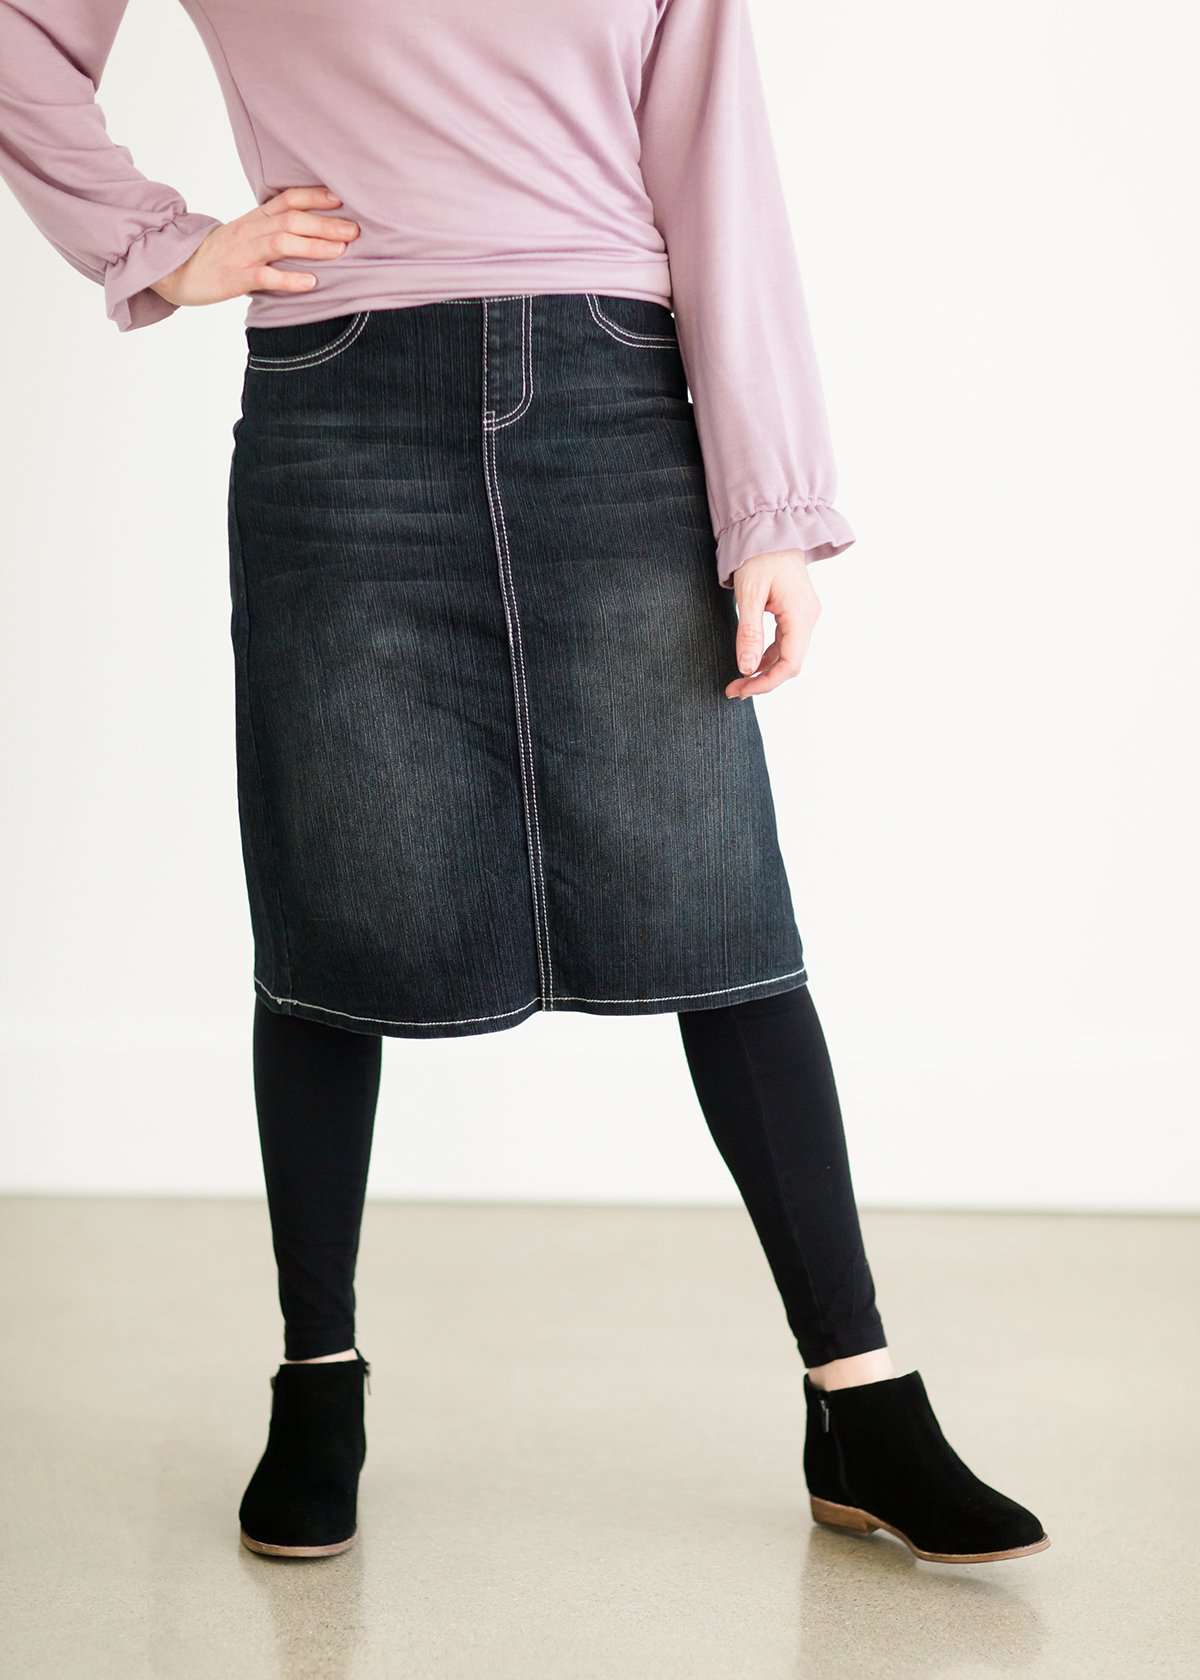 A black wash denim skirt with a ribbed knit elastic waist band. This skirt is paired with a purple sweatshirt, black leggings and black boots.